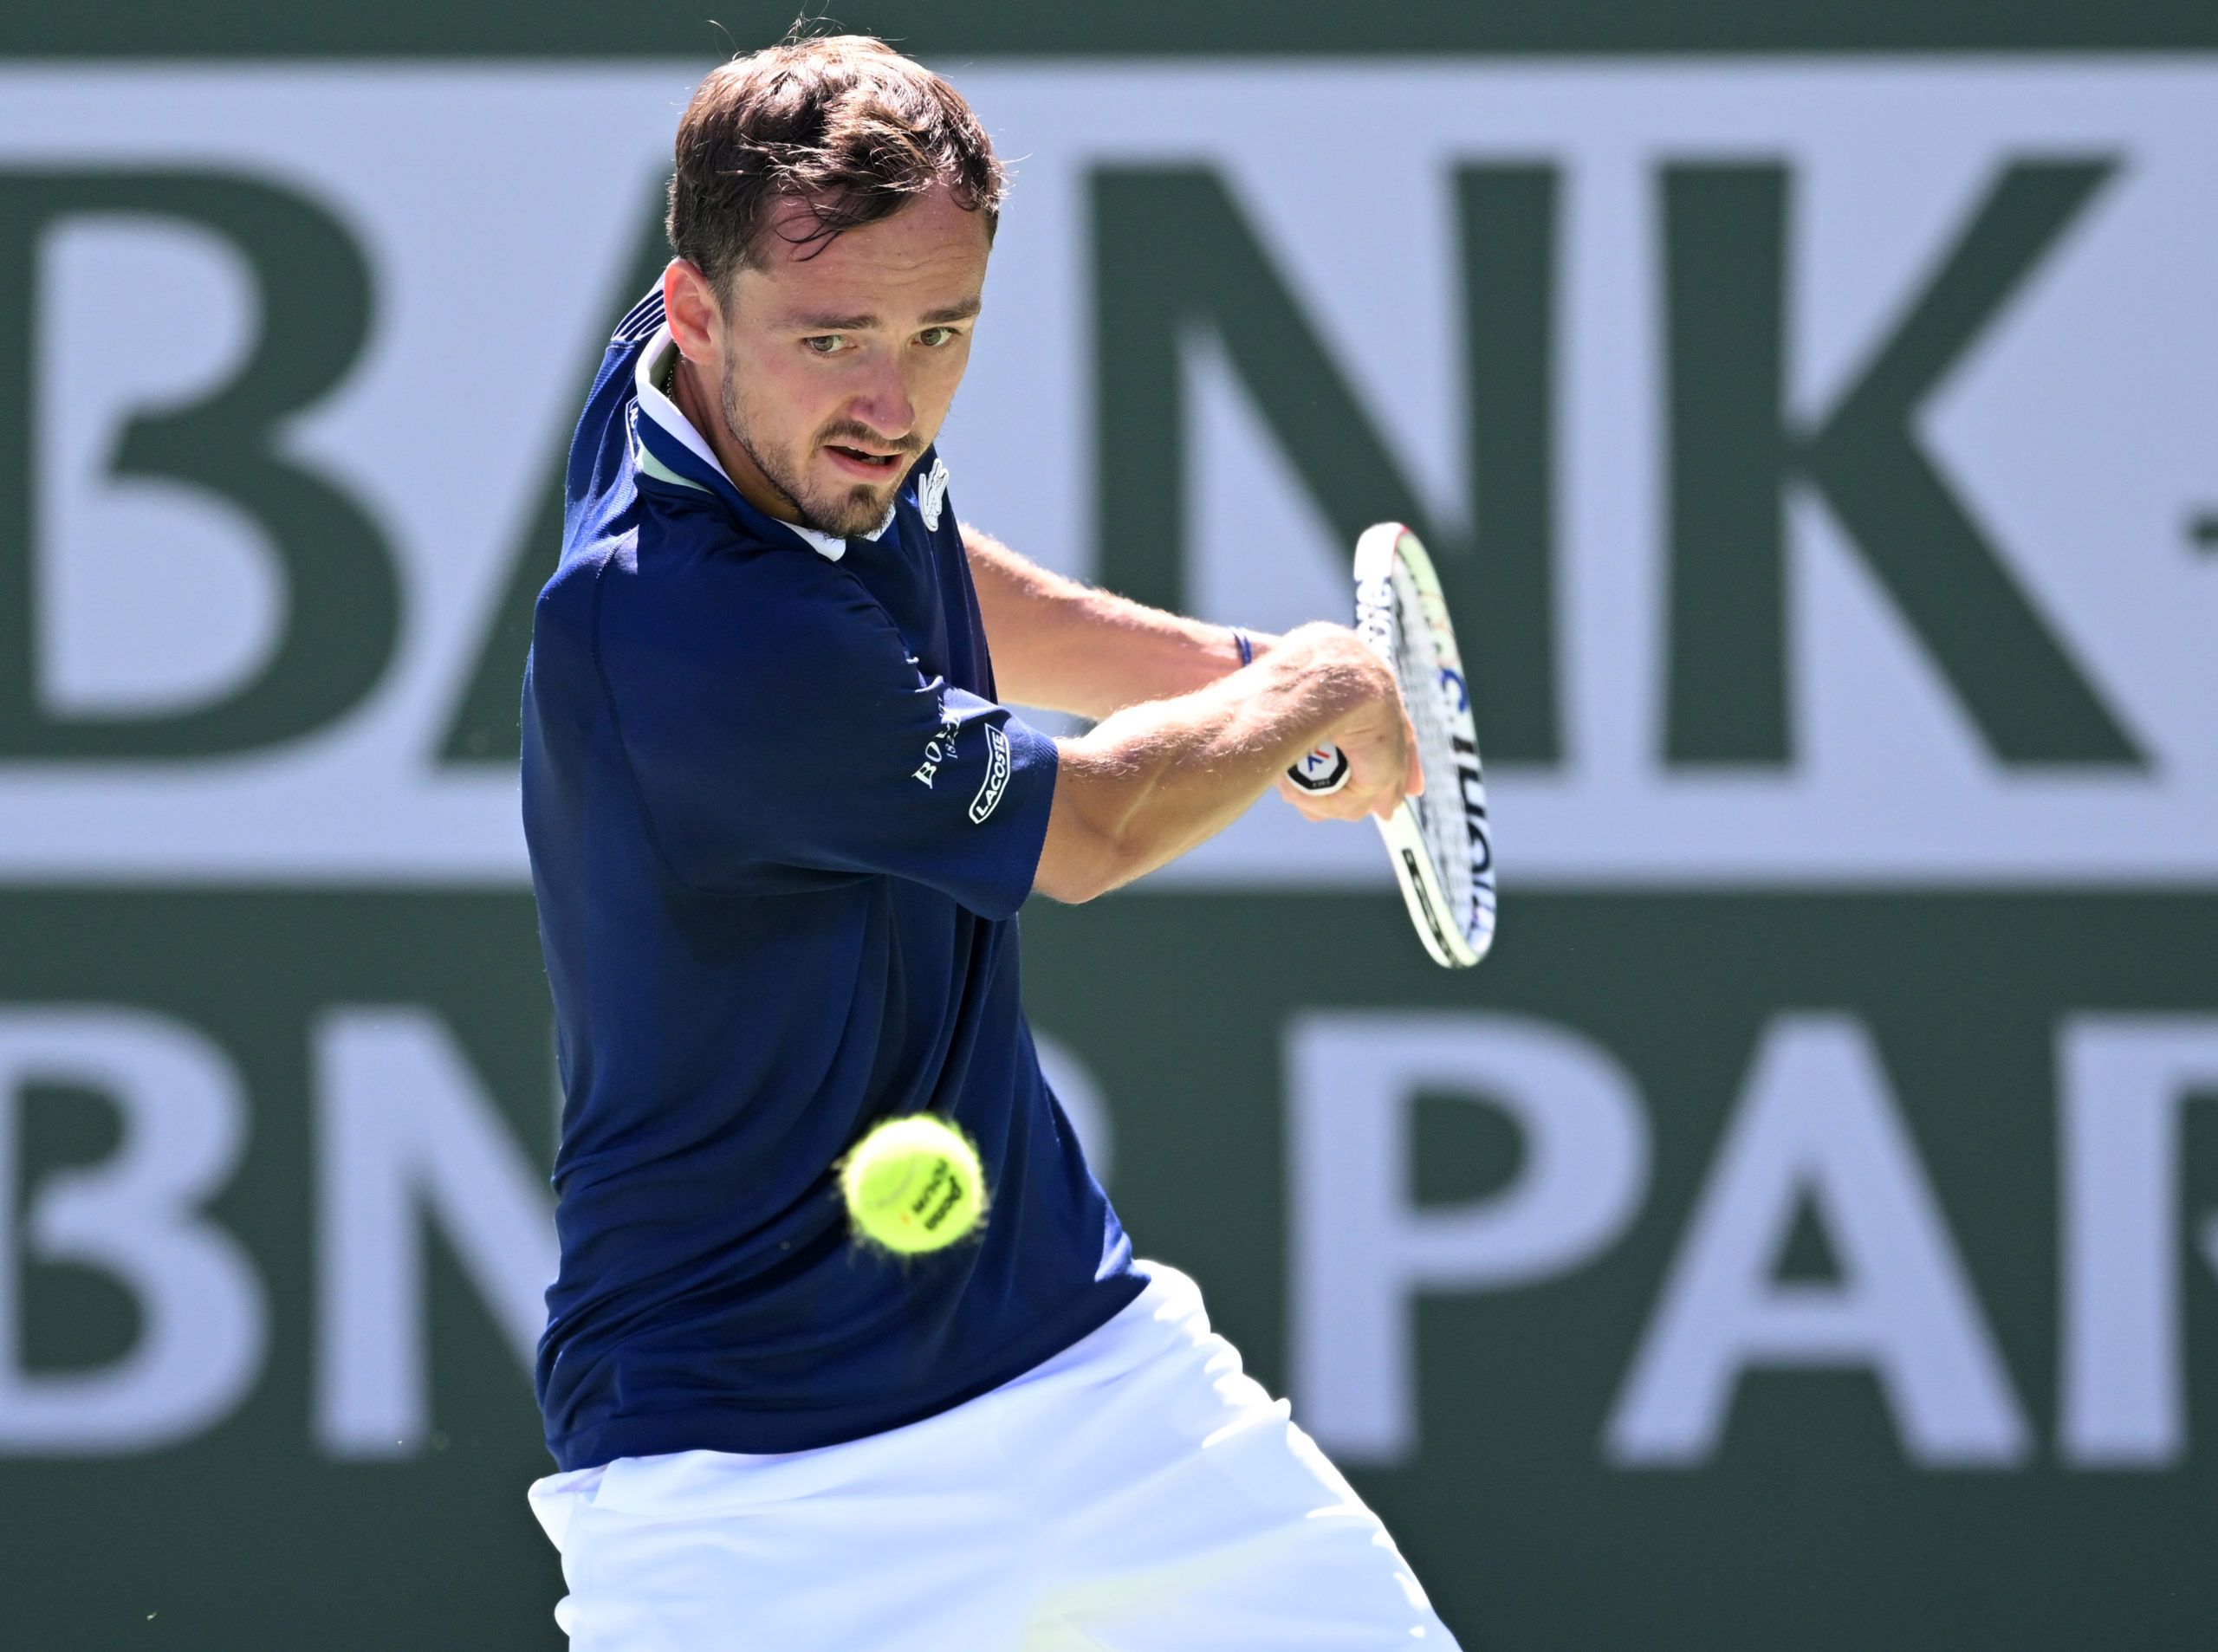 Mar 14, 2022; Indian Wells, CA, USA;  Daniil Medvedev (RUS) hits a shot in his third round match against Gael Monfils (FRA) during the BNP Paribas Open at the Indian Wells Tennis Garden.